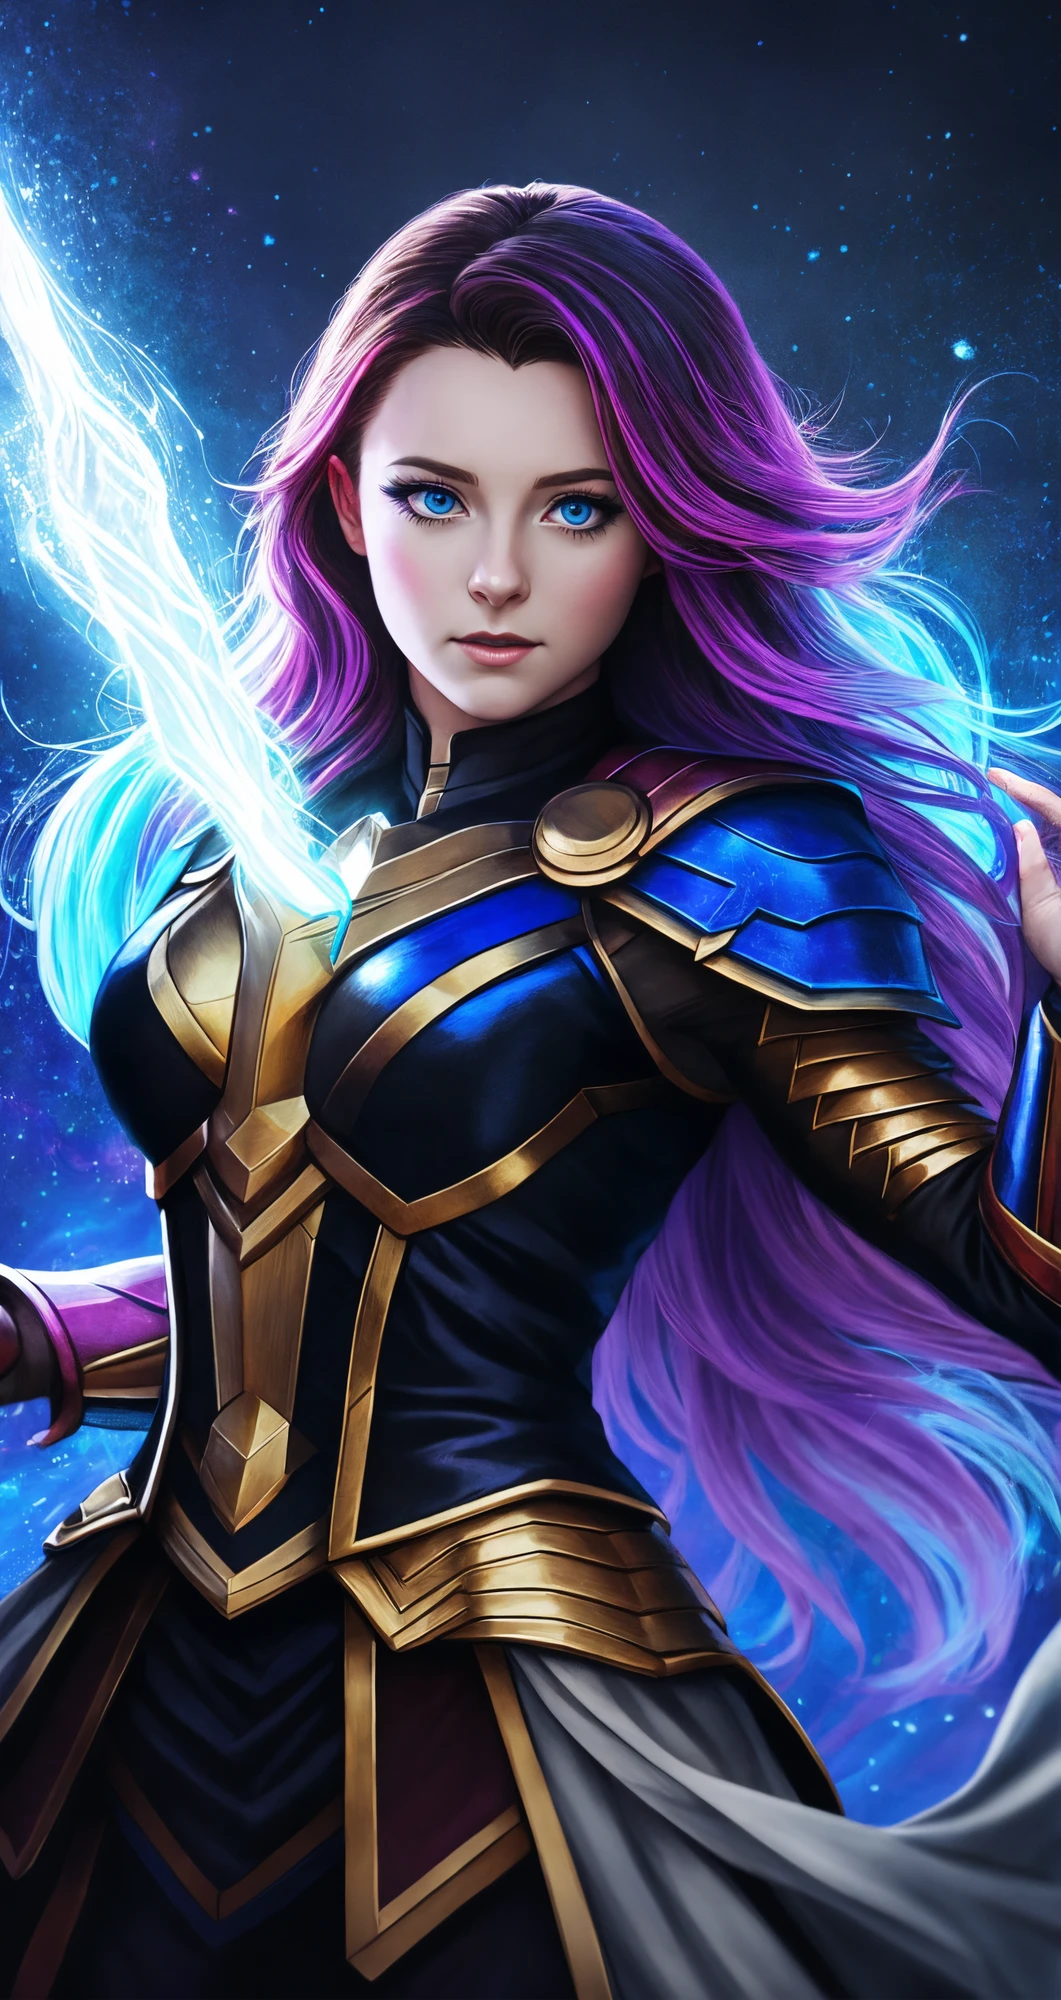 audra miller, solo, rainbow hair, blue eyes, (nun:0.8),
verism style,
middle shot, closeup, Jupon,
Veduta painting, [hanging breast],
dressed in her majestic Asgardian armor,high-definition 8K artwork,encapsulating the spirit of the beloved game, gothic, cgsociety, Casuals, big hair,
detailed background, kindhearted, (average:0.8),